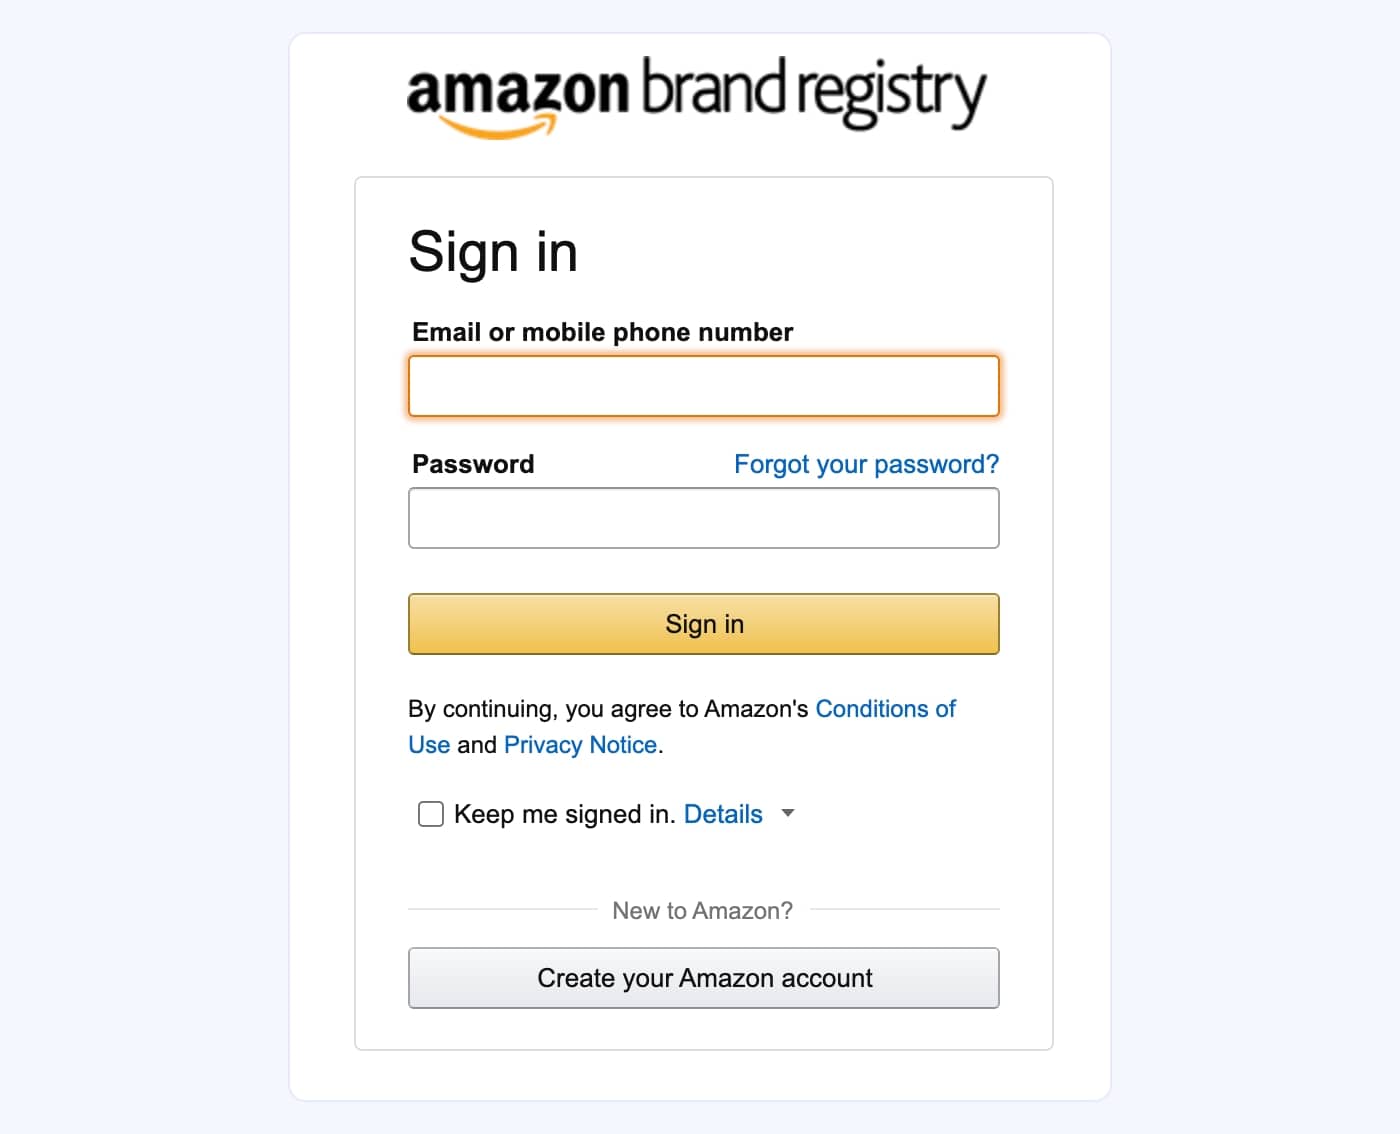 How To Apply For Amazon Brand Registry?